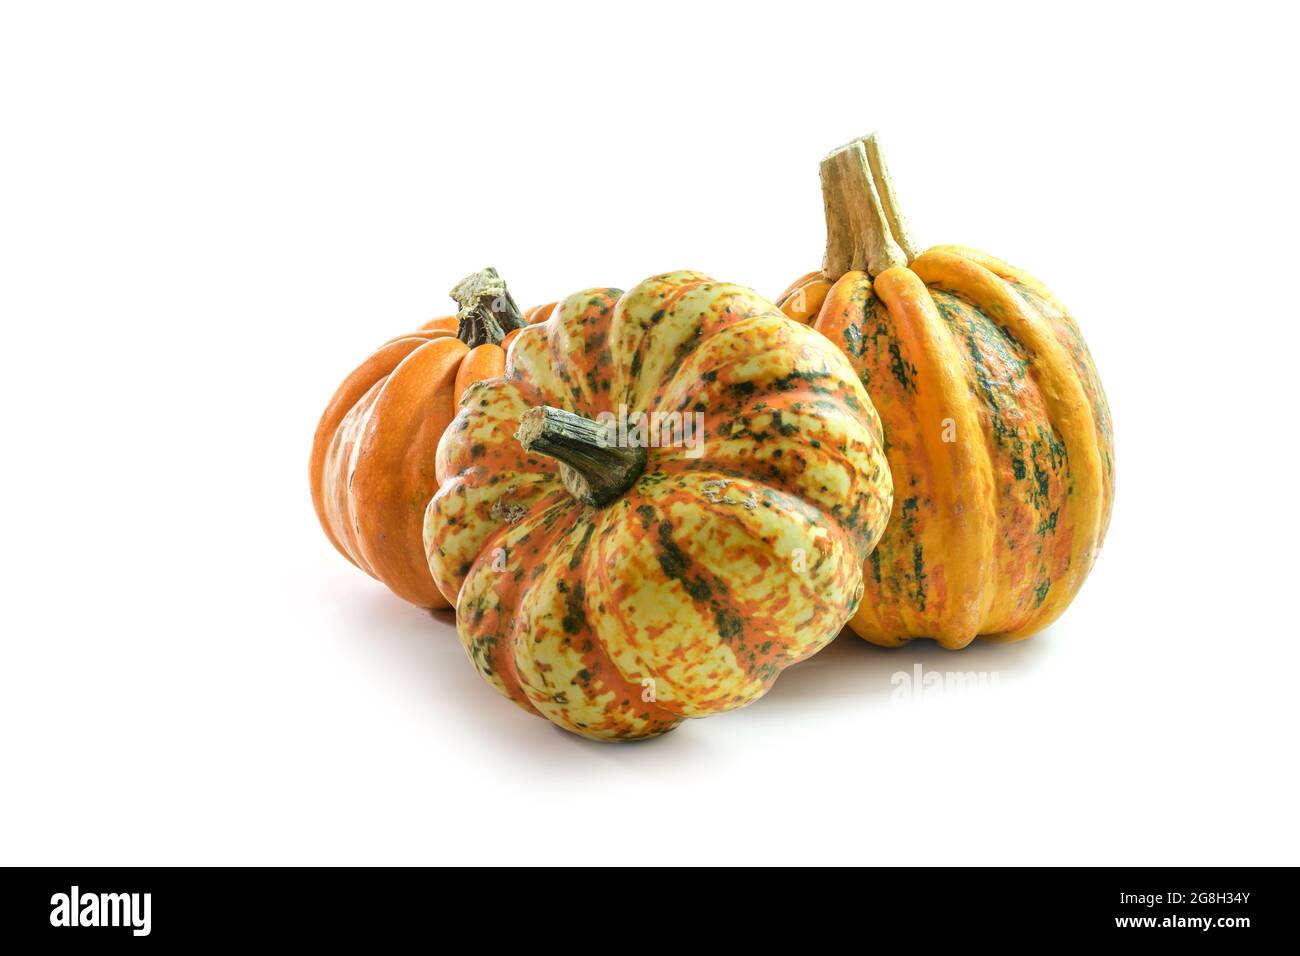 Three different food pumpkins or squashes for Halloween and Thanksgiving fresh from the market, isolated on a white background with copy space Stock Photo